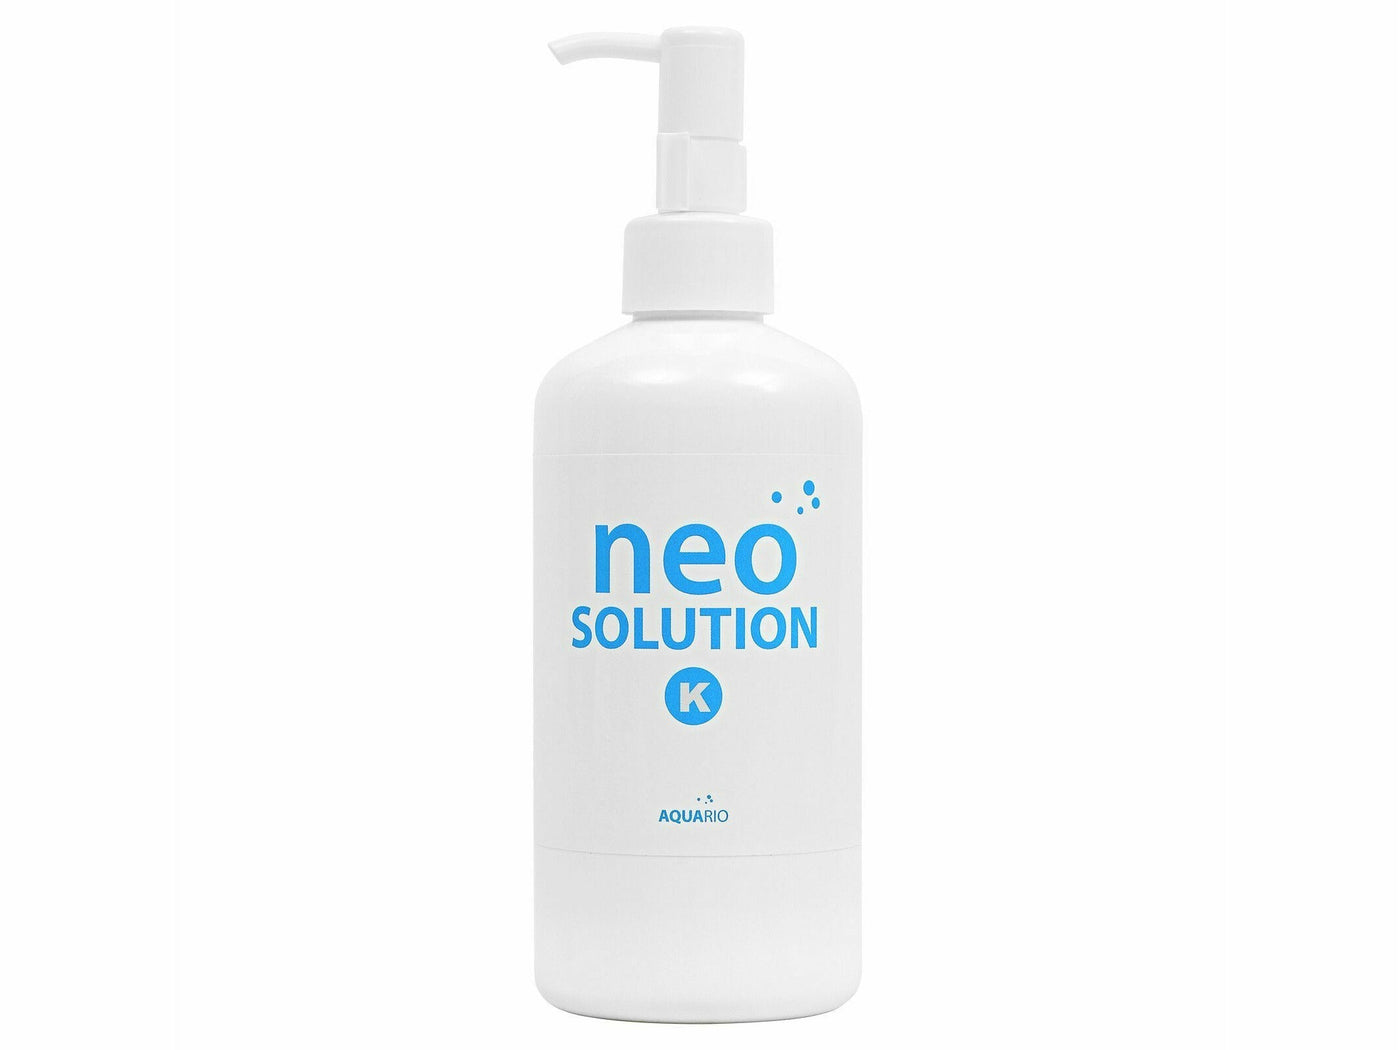 Neo Solution K-300ml with pump